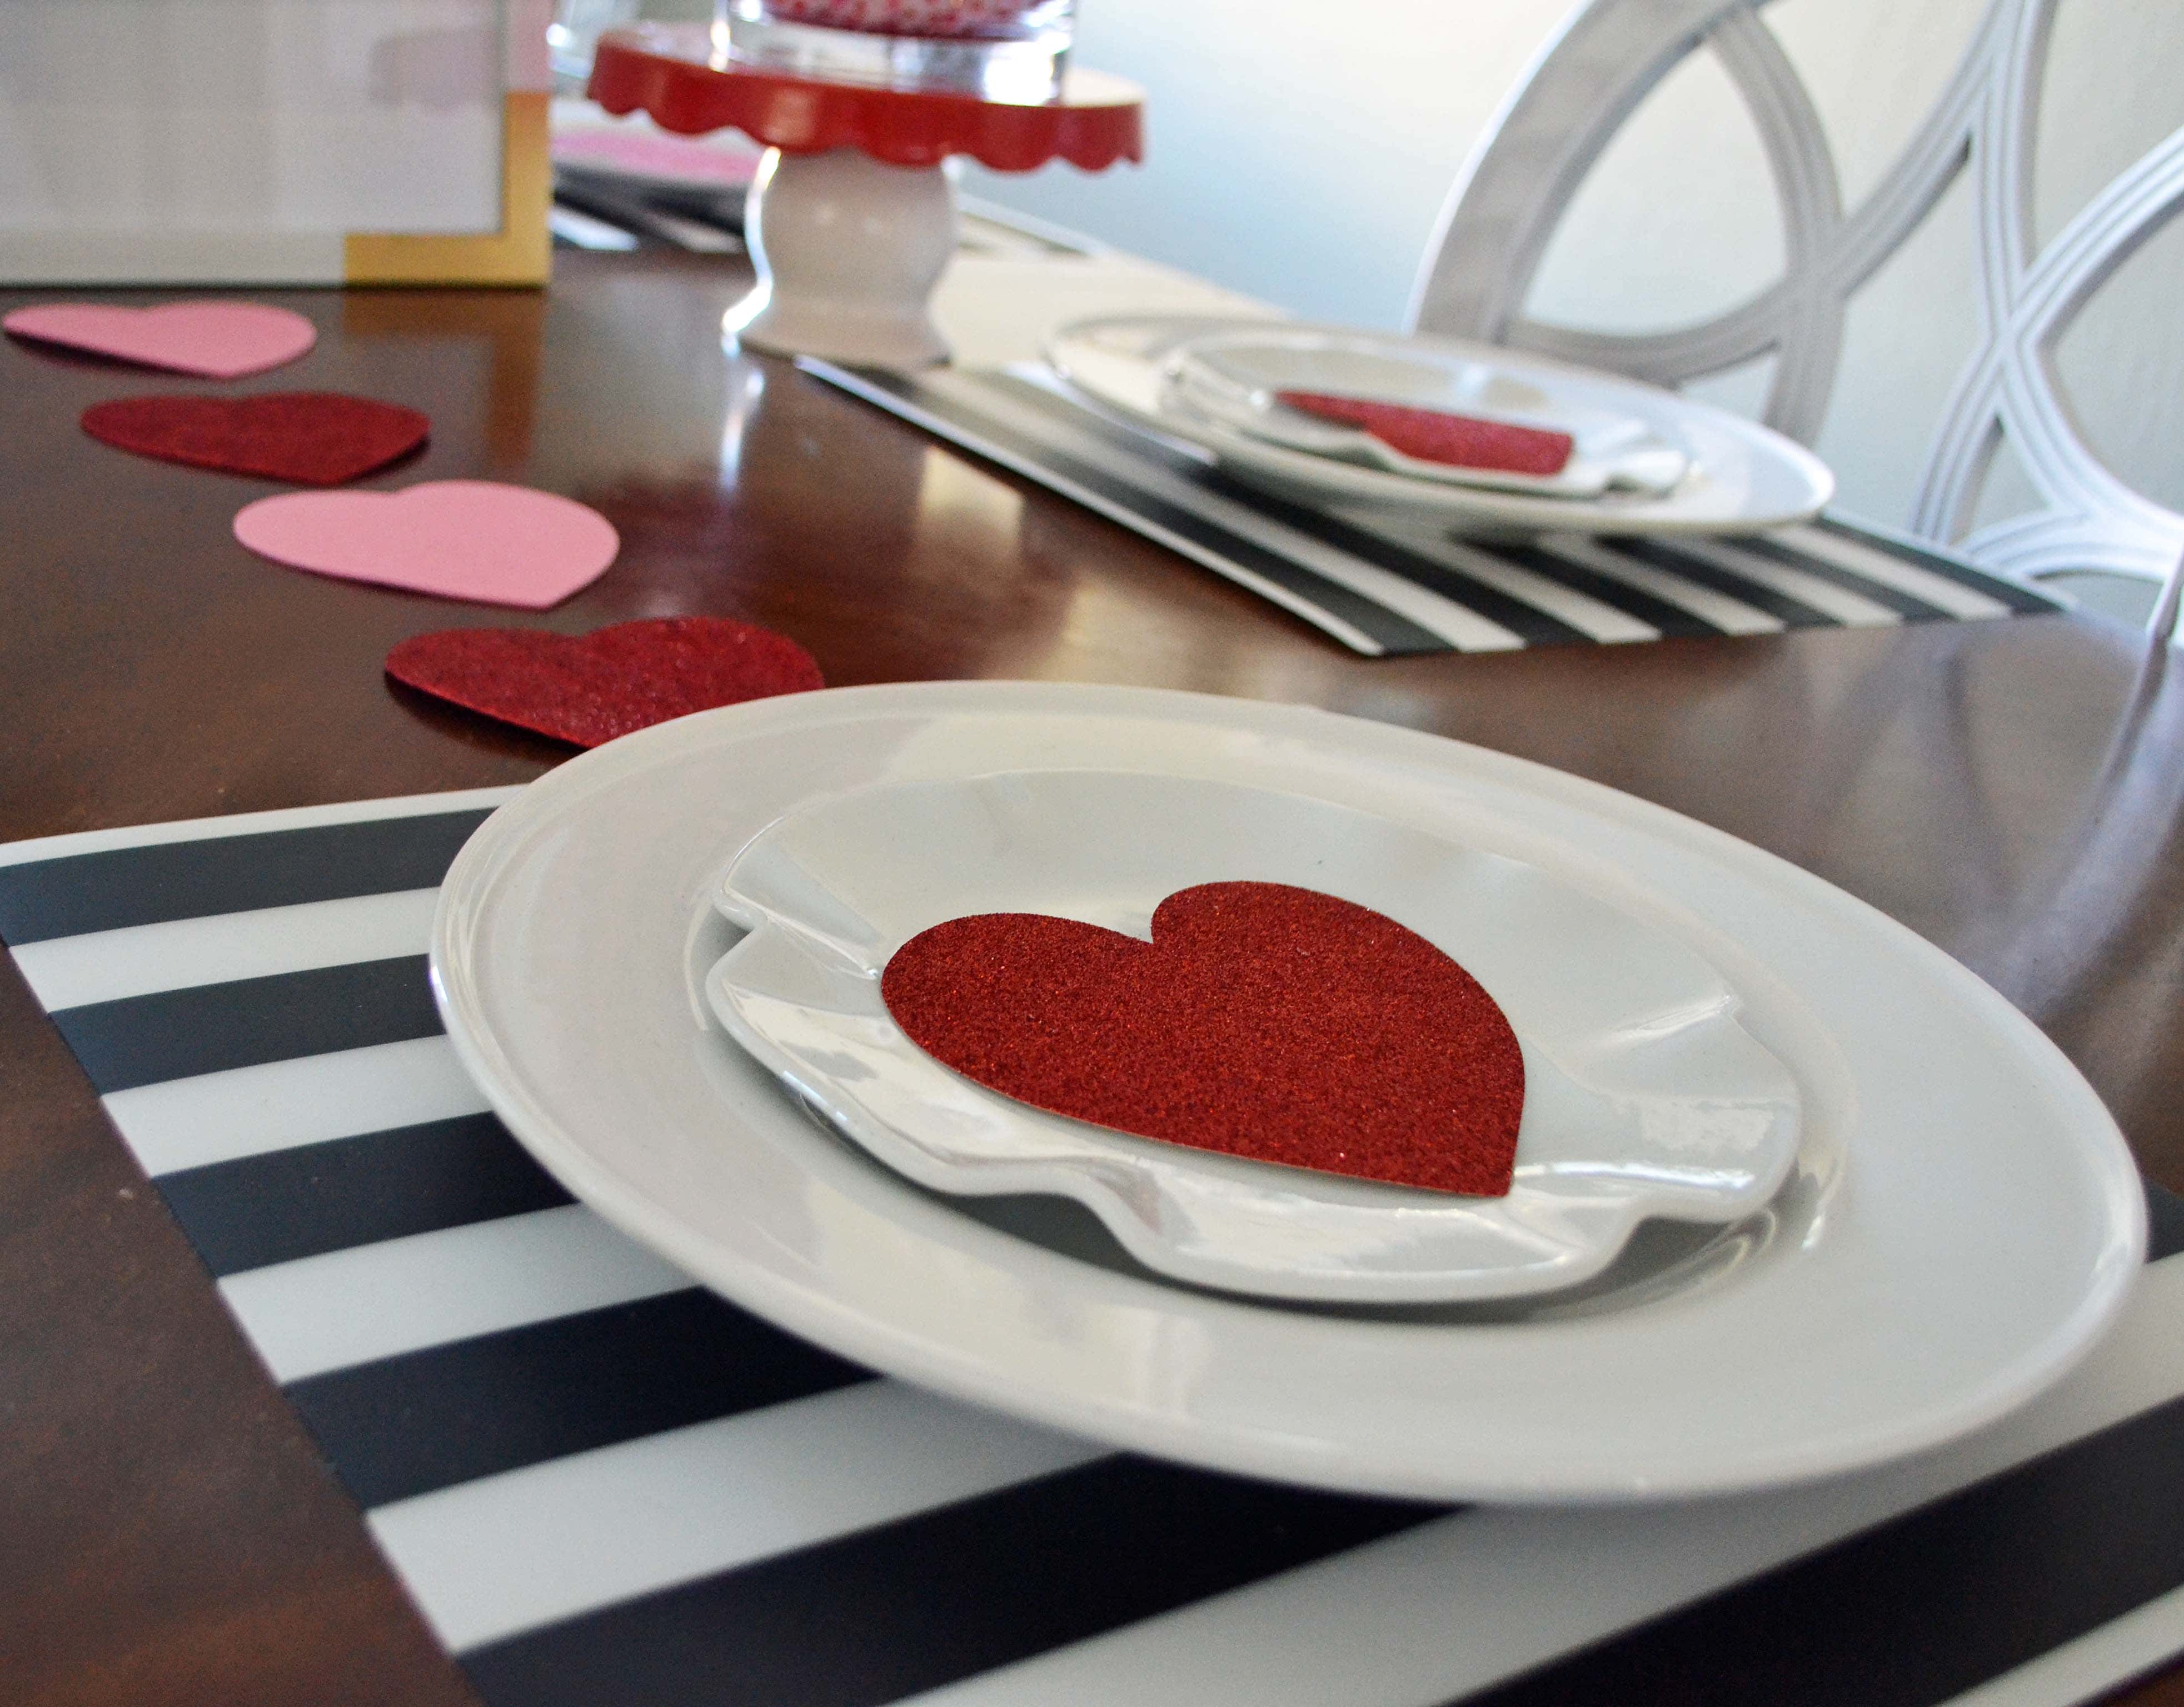 5 ways to make Valentine's Day special for kids